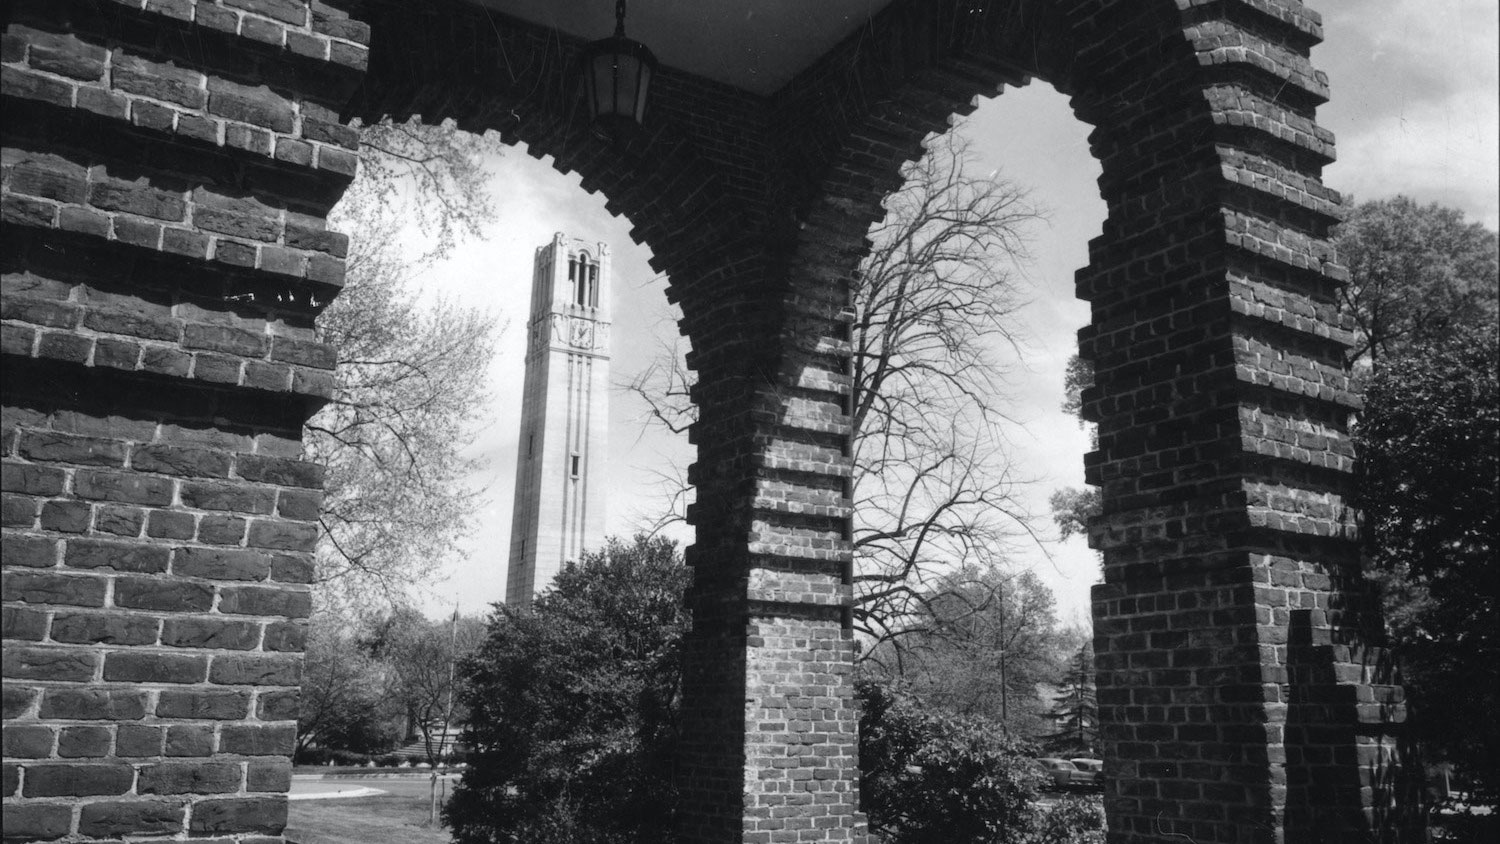 The Belltower as seen from Holladay Hall